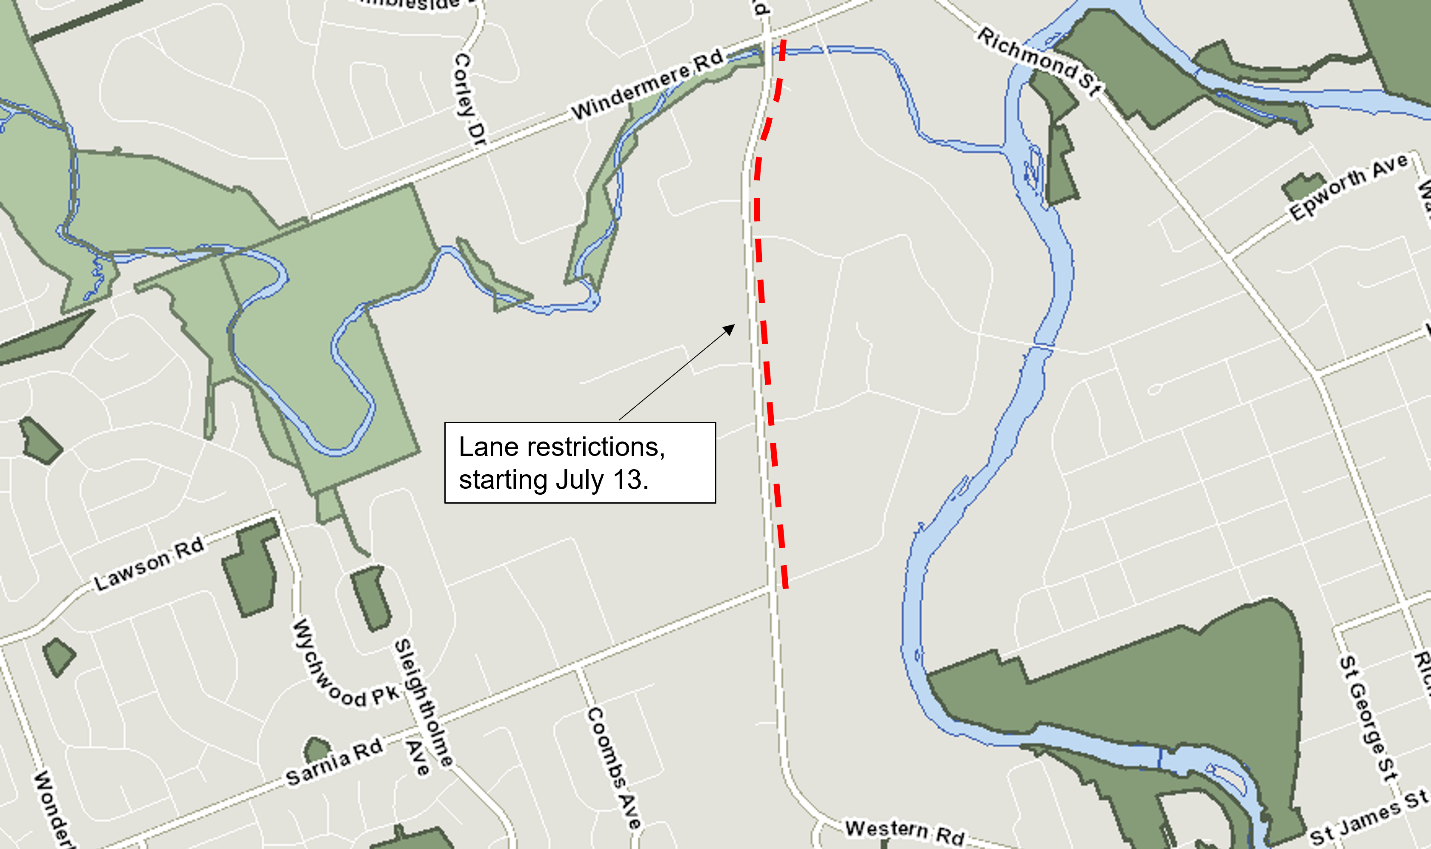 This map shows the upcoming lane restrictions at Western Road